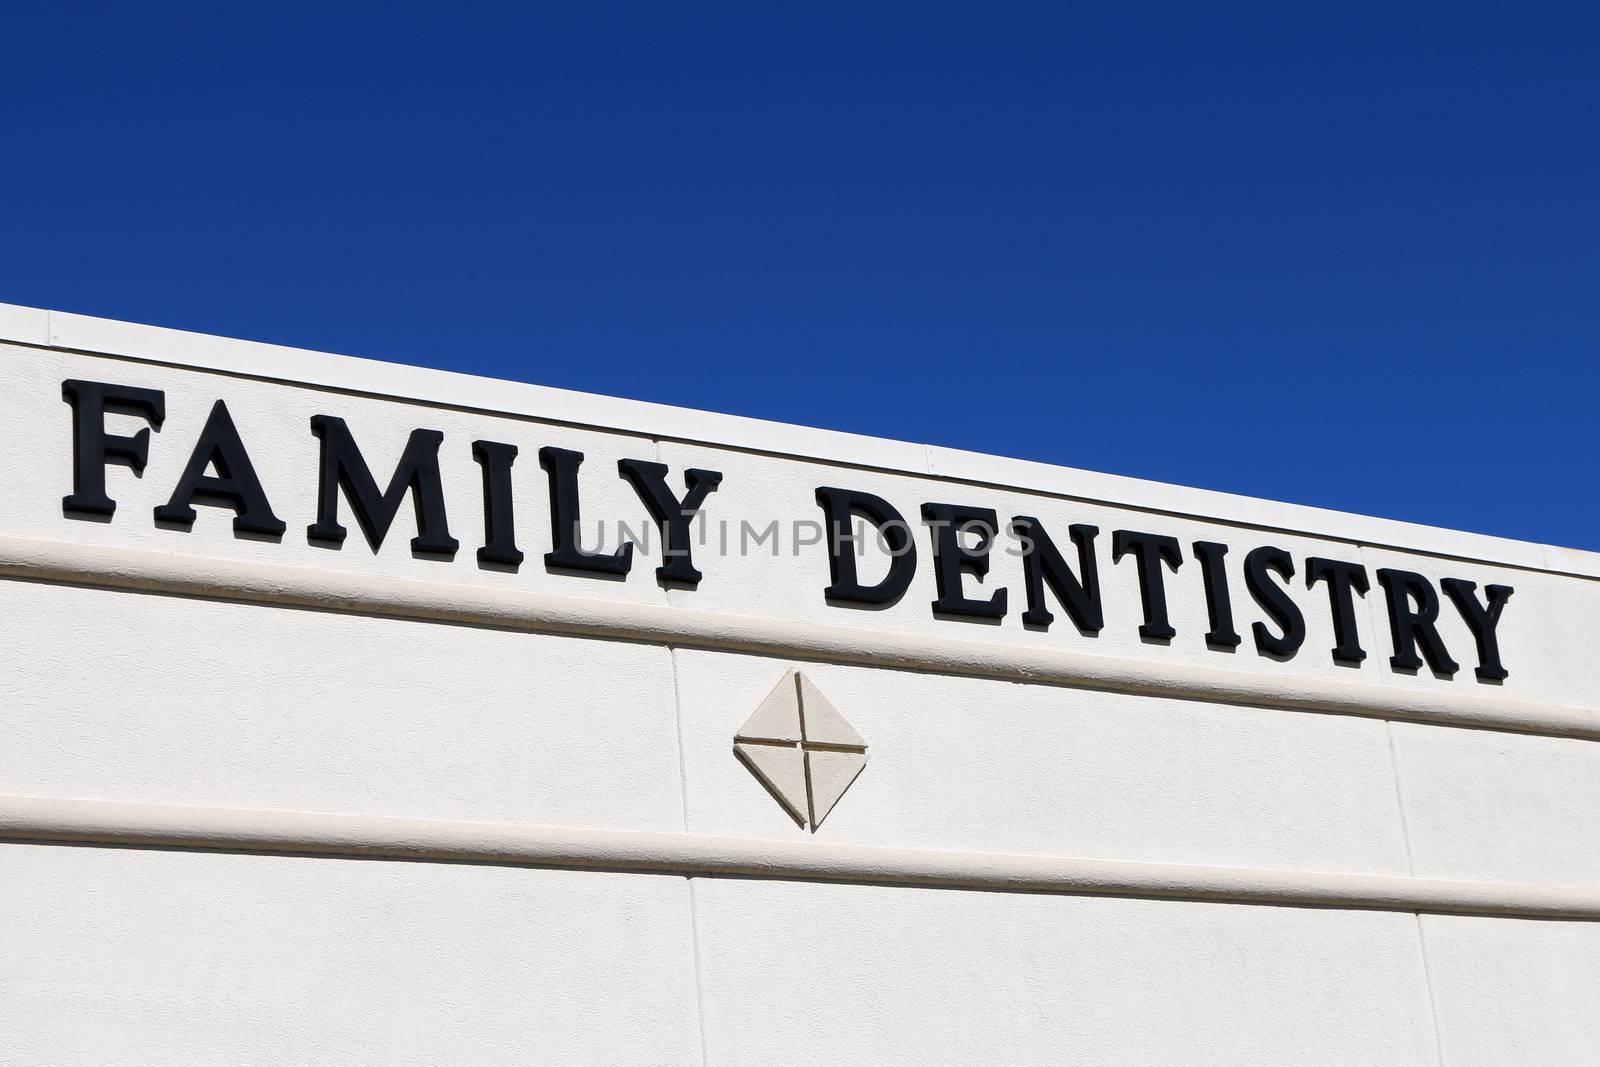 Family Dentist sign by jimmartin